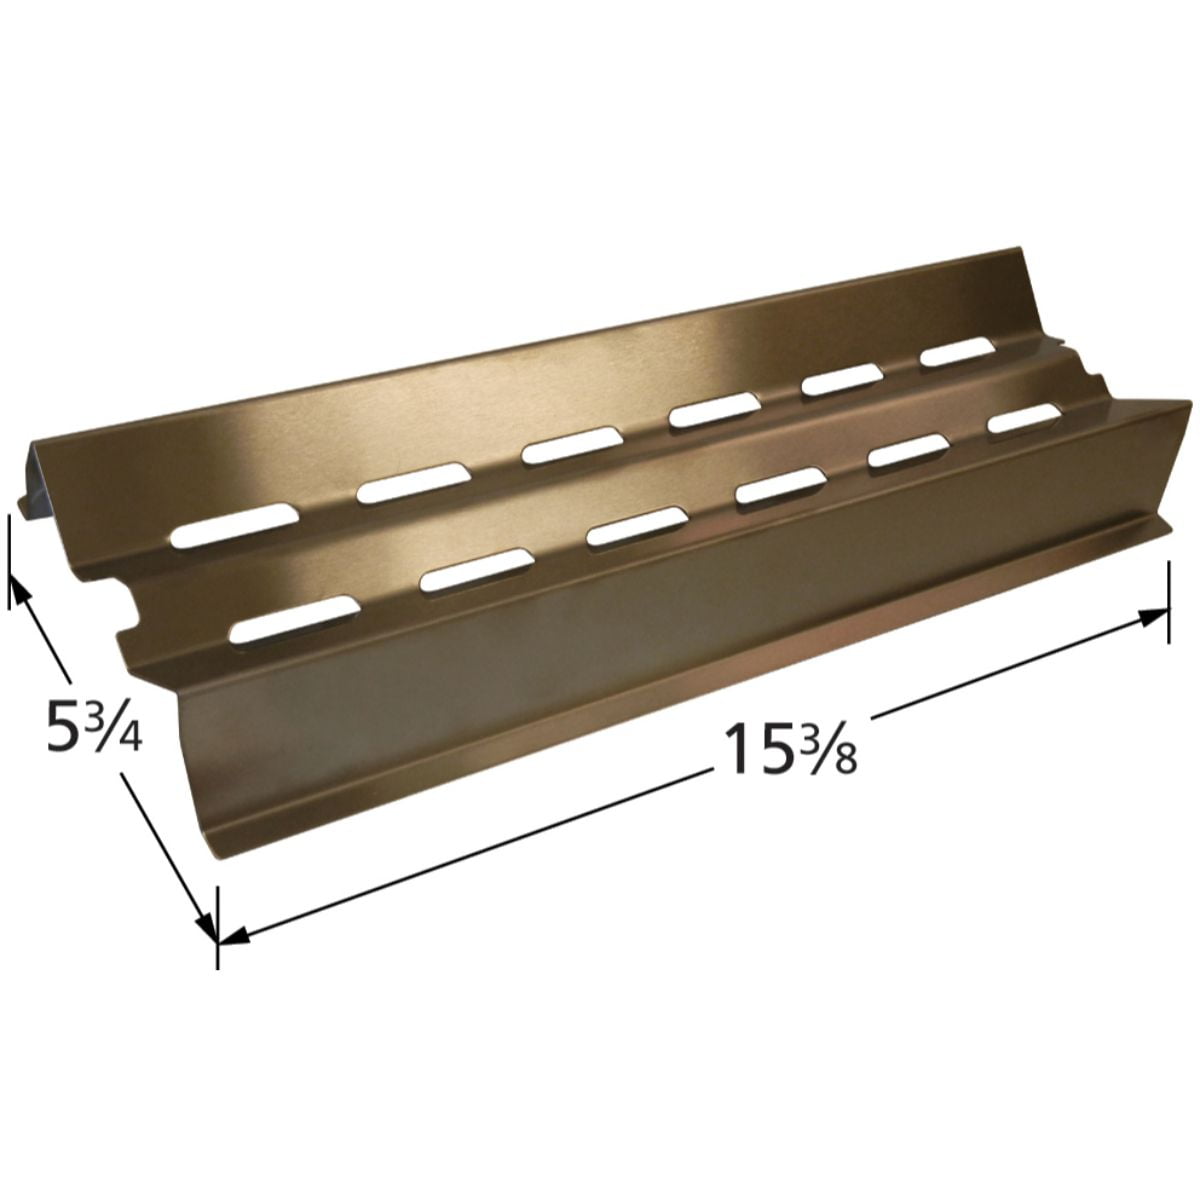 Stainless Steel Heat Plate for Mr. Steak Brand Gas Grills